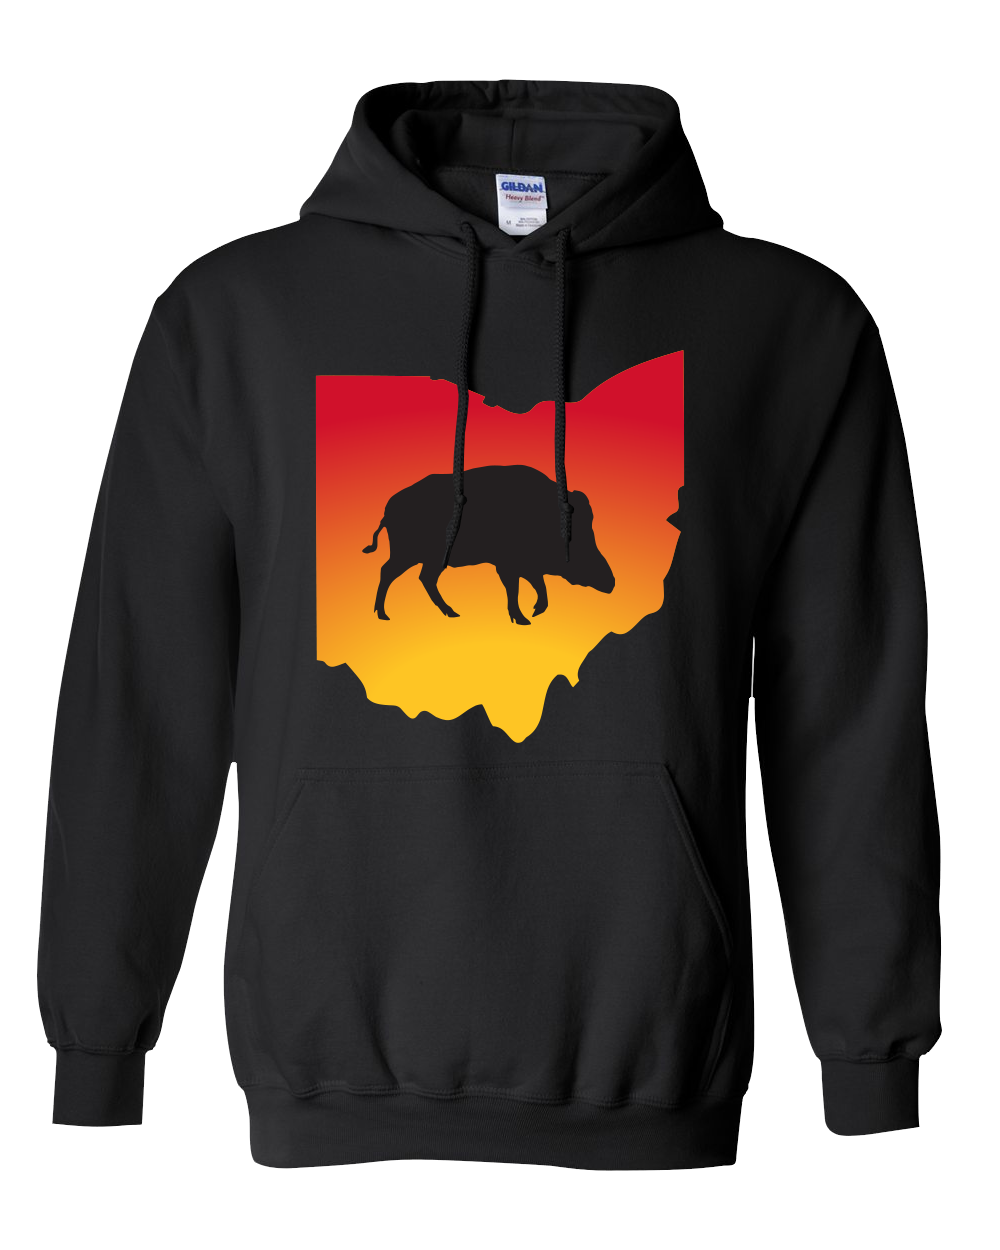 Pullover Hooded Sweatshirt Ohio Black Wild Hog Vibrant Design High Quality Tight Knit Ring Spun Low Maintenance Cotton Printed With The Newest Available Color Transfer Technology